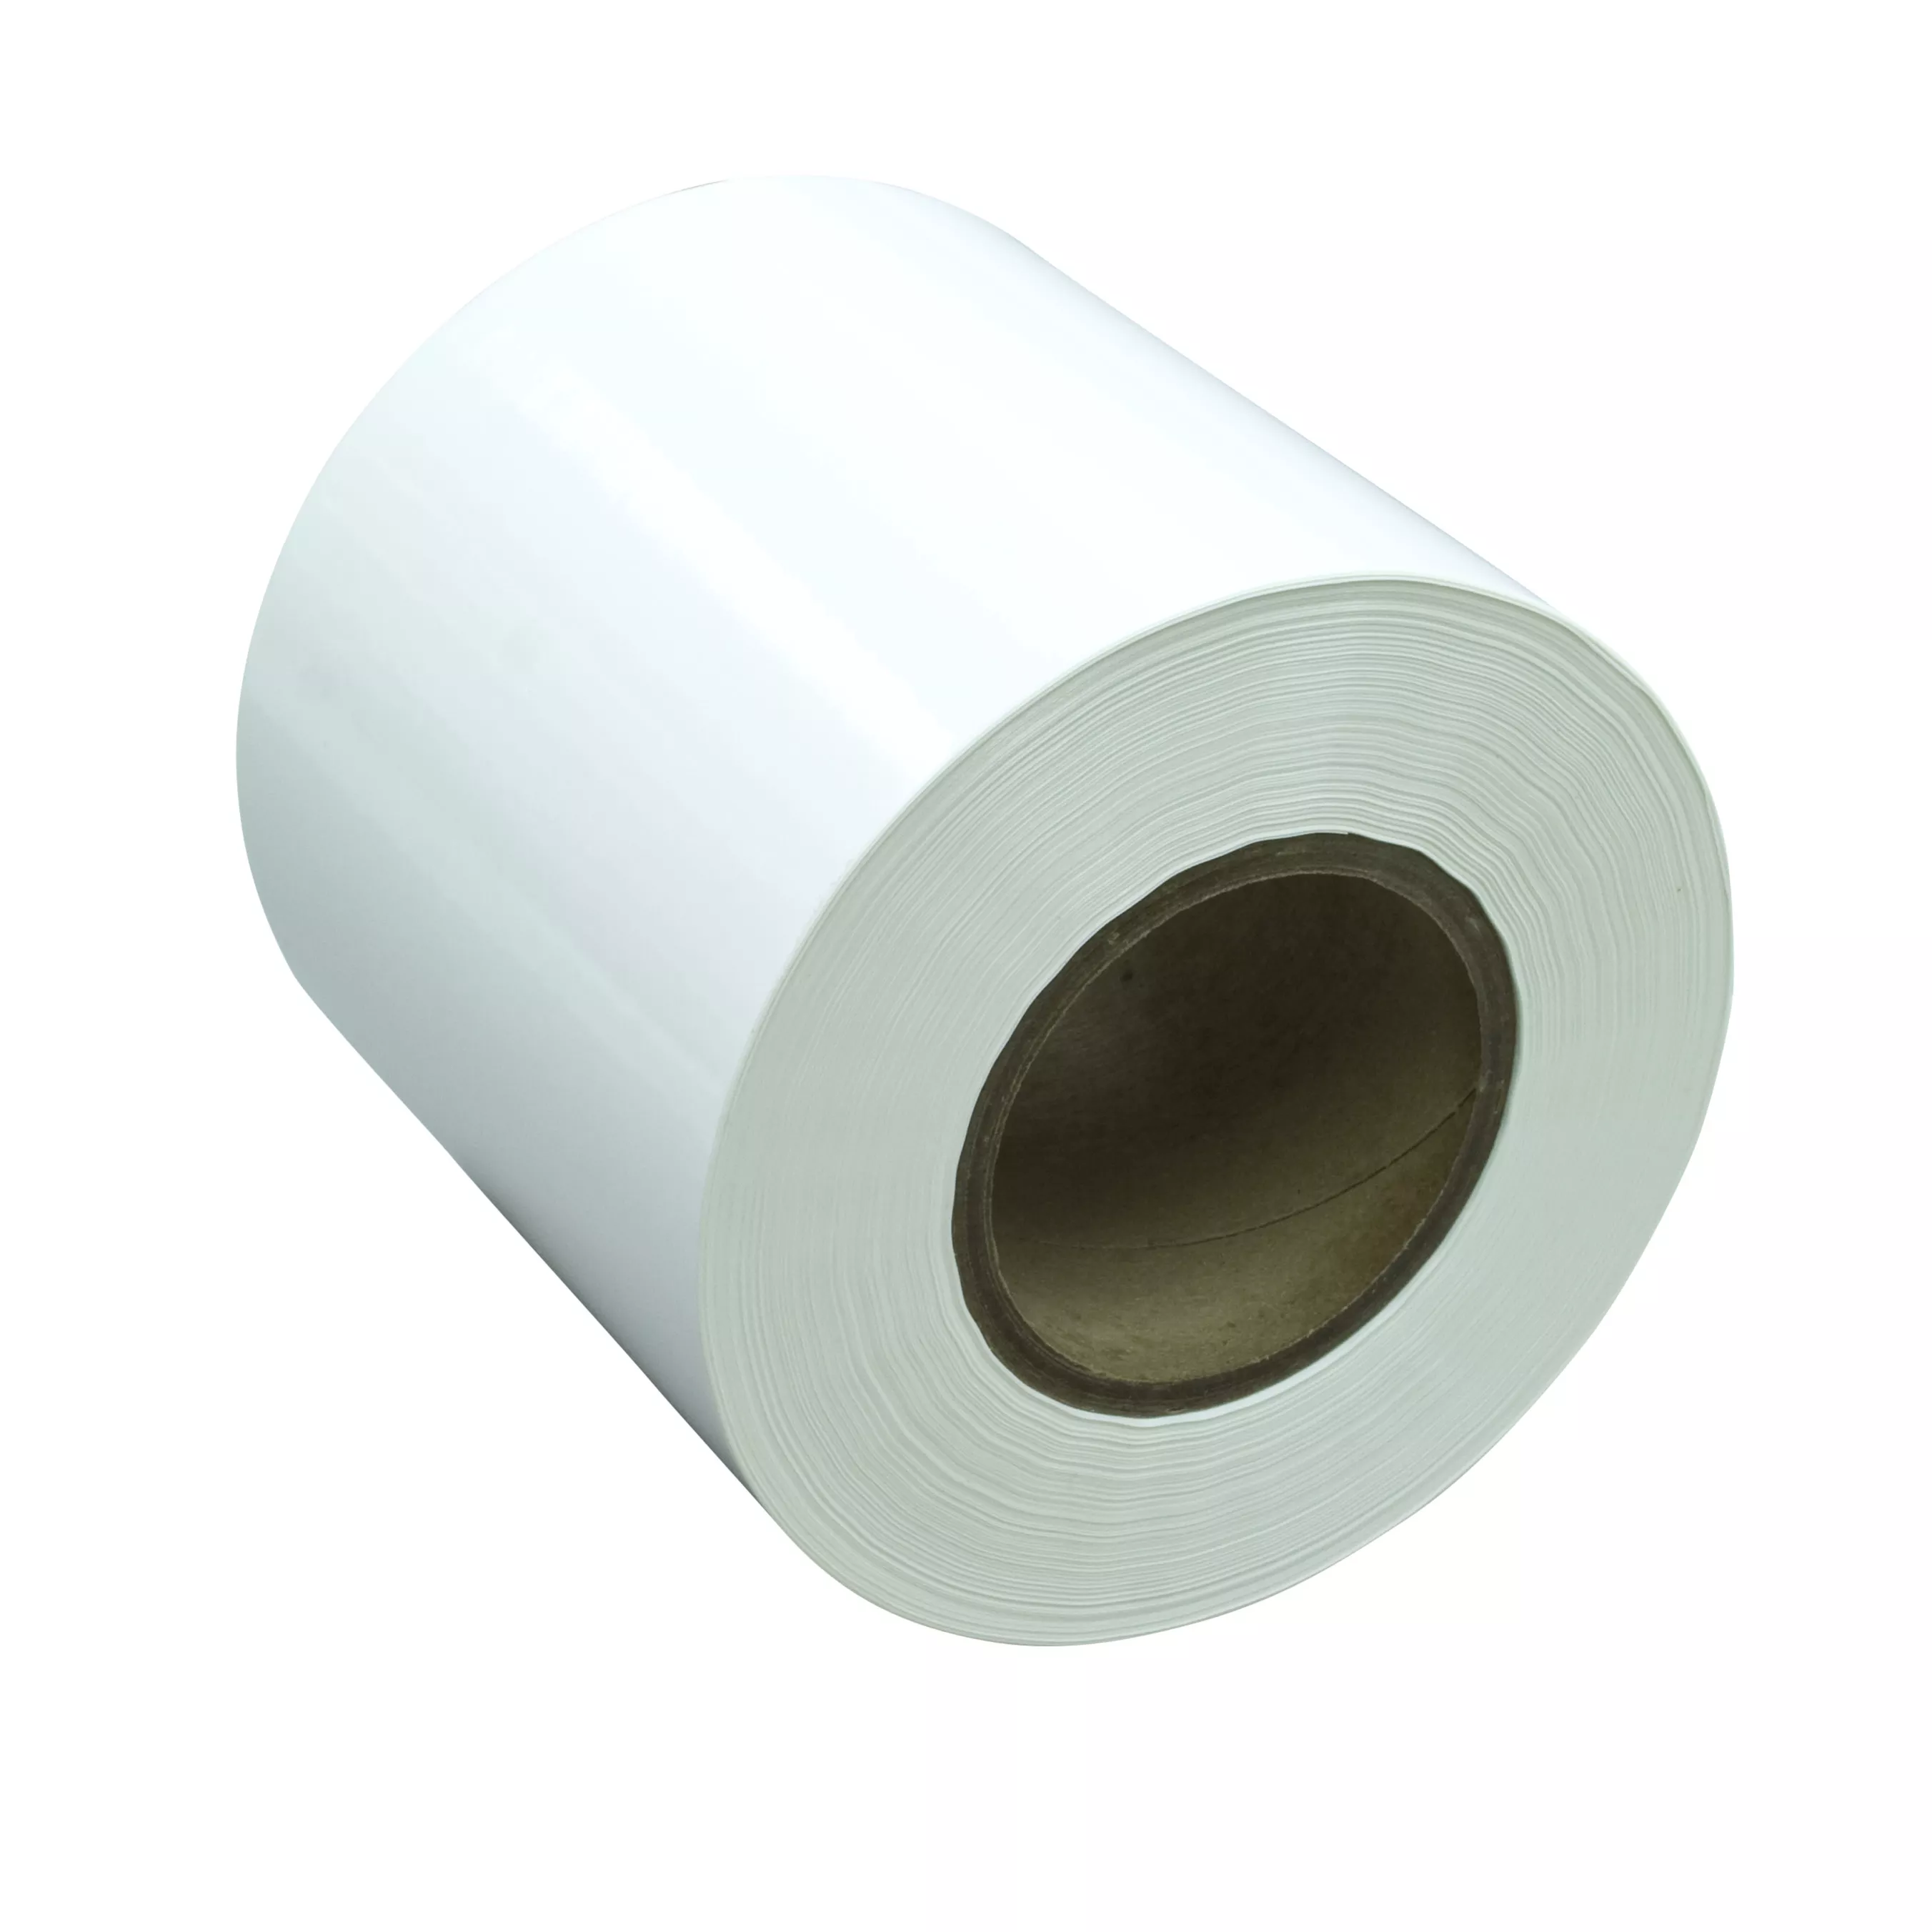 3M™ Press Printable Label Material 7331/7860, White Polyester Gloss, 6
in x 1668 ft, 1 Roll/Case